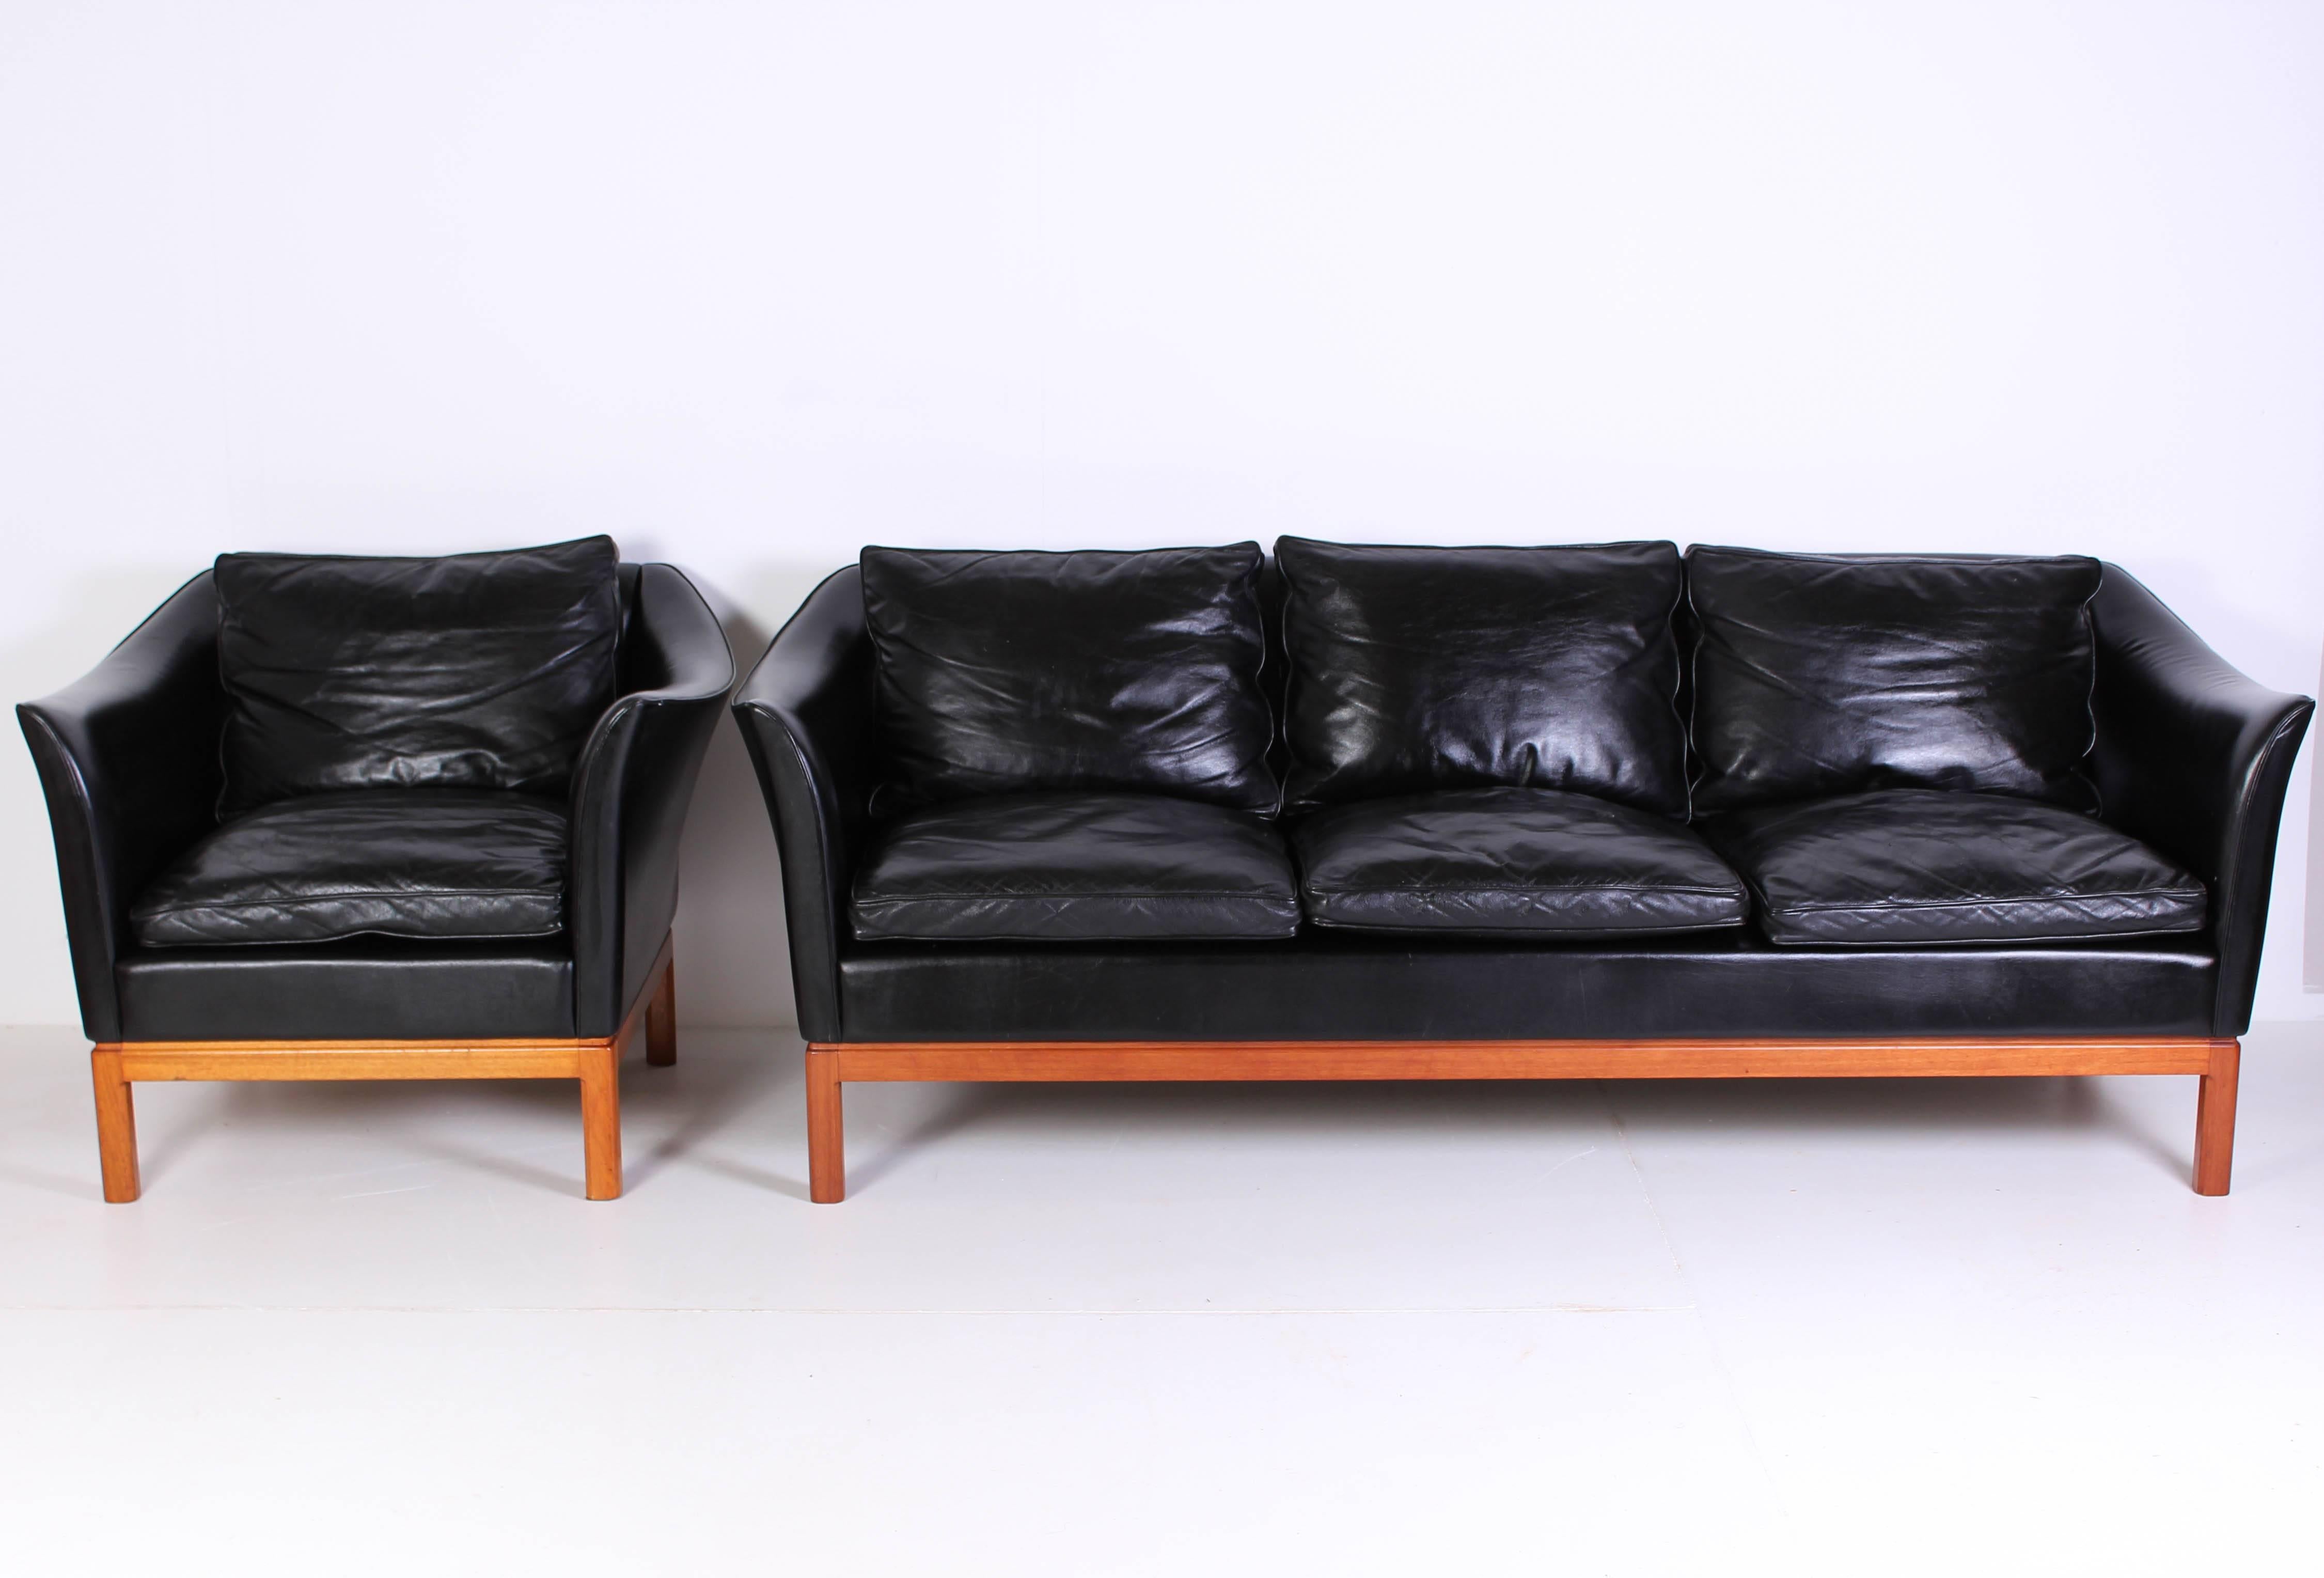 Set of midcentury three seat sofa and lounge chair with original black leather upholstery. The set is from circa 1960 and originates from Denmark. The curved armrests is a very nice detail that really makes the set stand out. The legs are made out